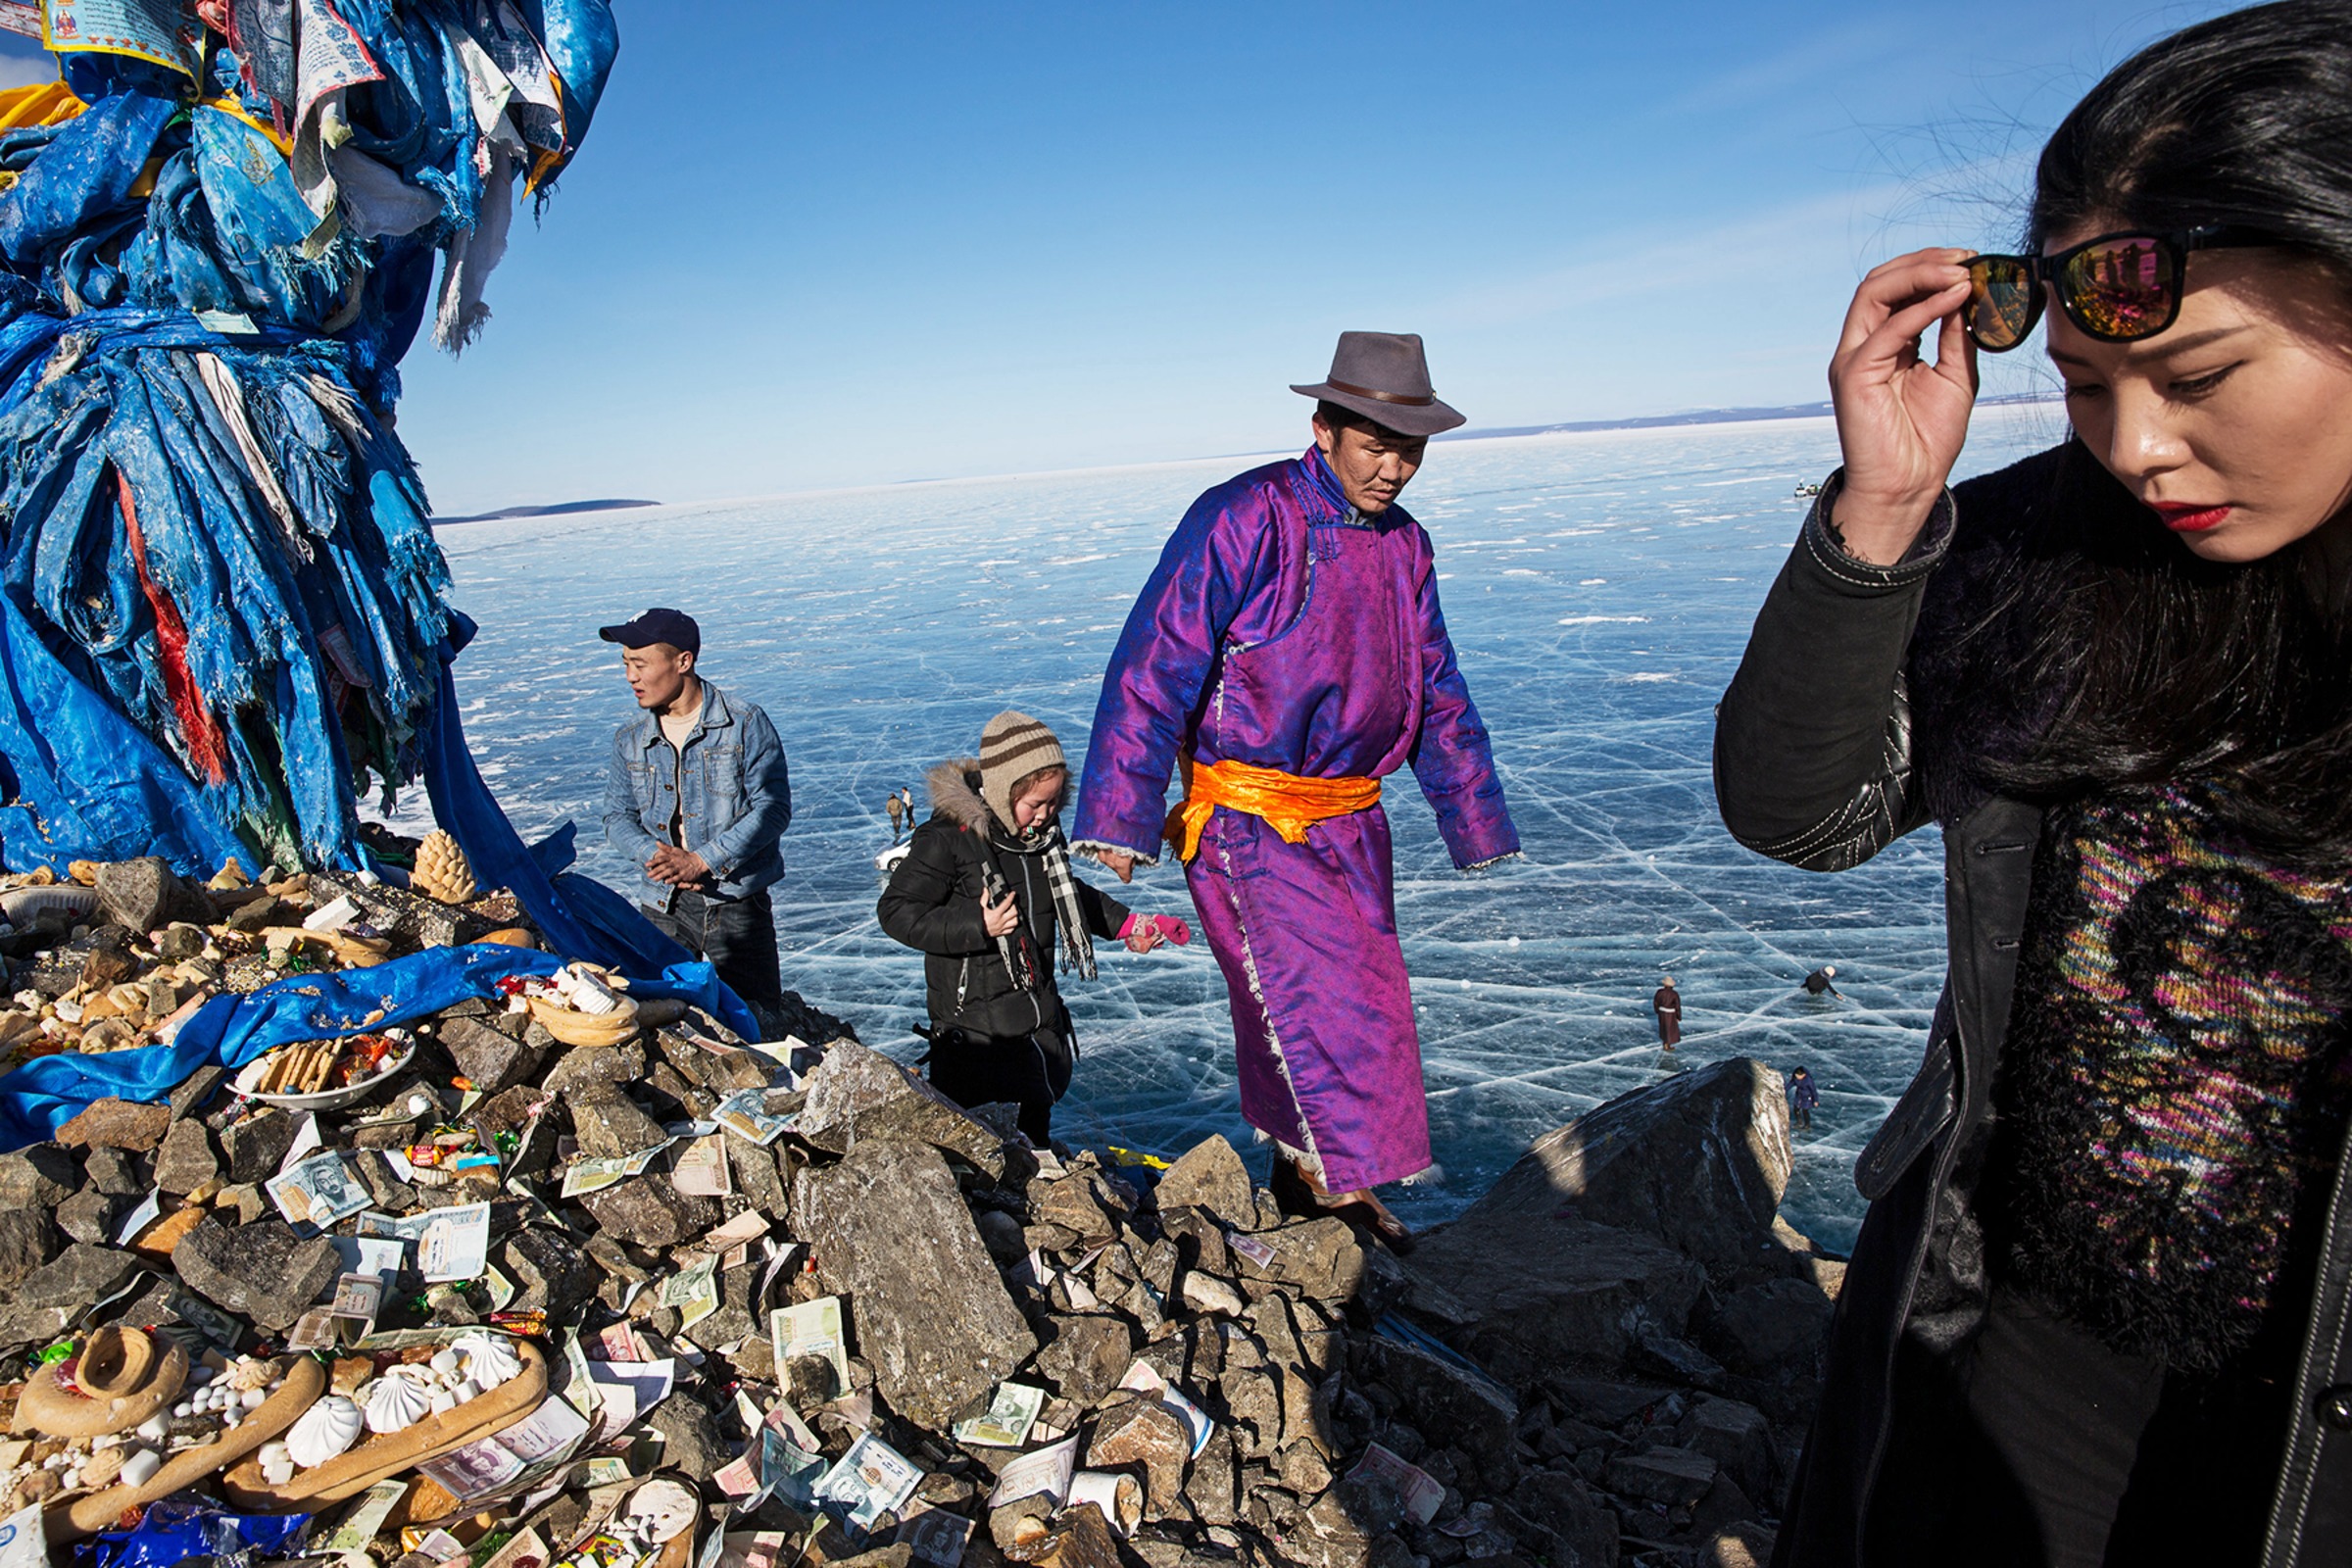 Mongolian men and women pray and make offerings at an Ovoo near the Lake Khovsgol Ice Festival in Khatgal, Mongolia. (Taylor Weidman—LightRocket/Getty Images)